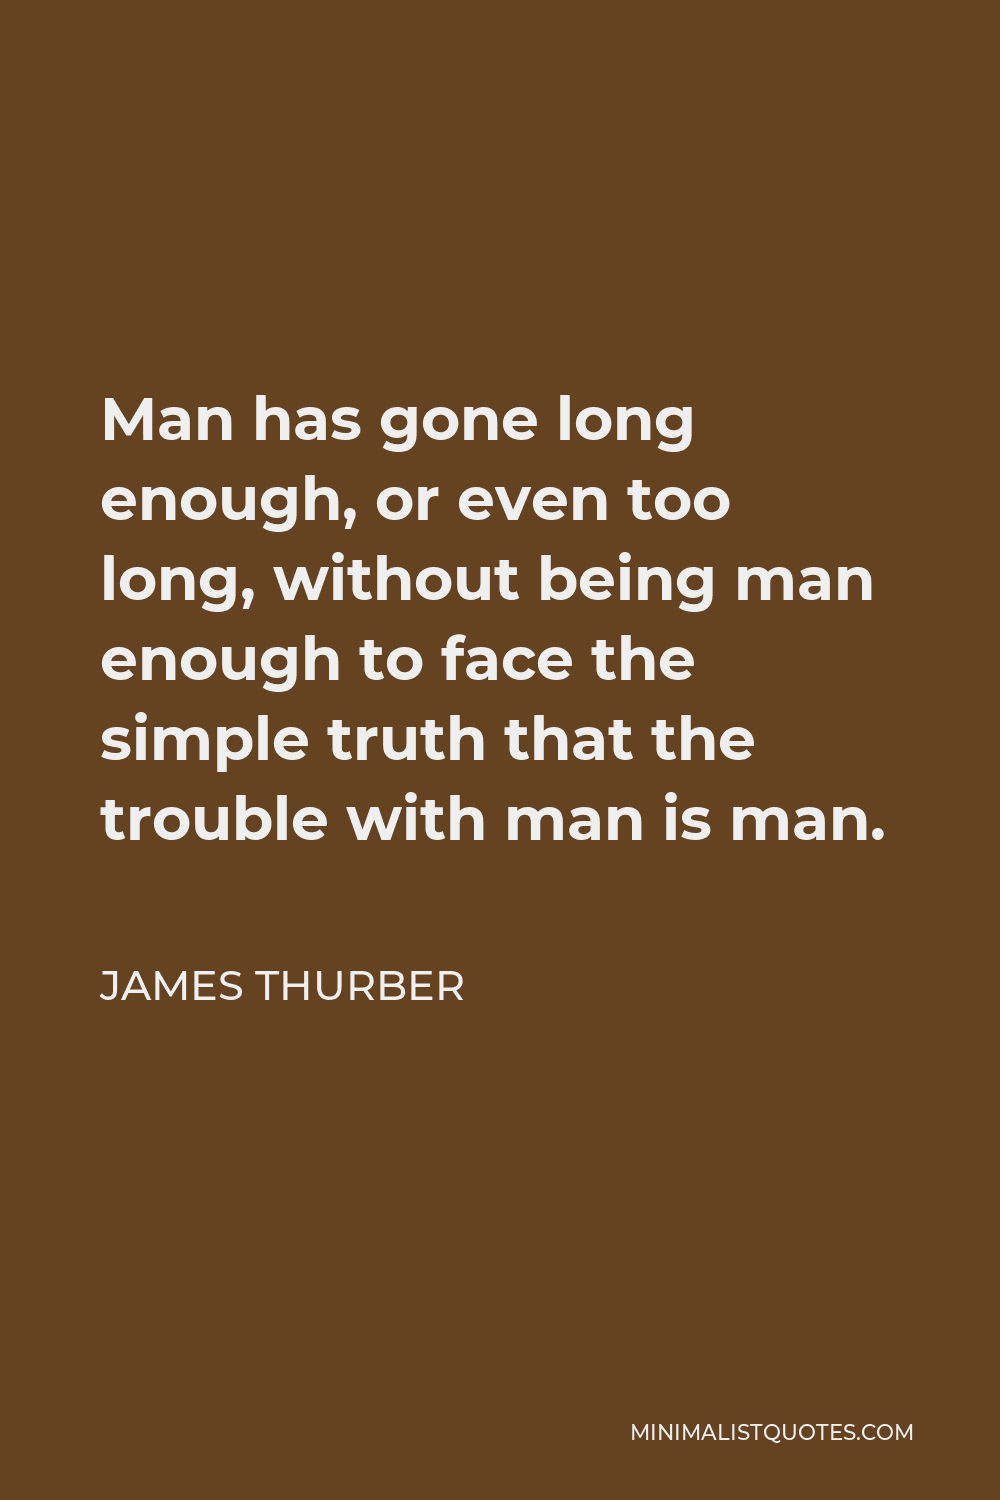 James Thurber Quote - Man has gone long enough, or even too long, without being man enough to face the simple truth that the trouble with man is man.